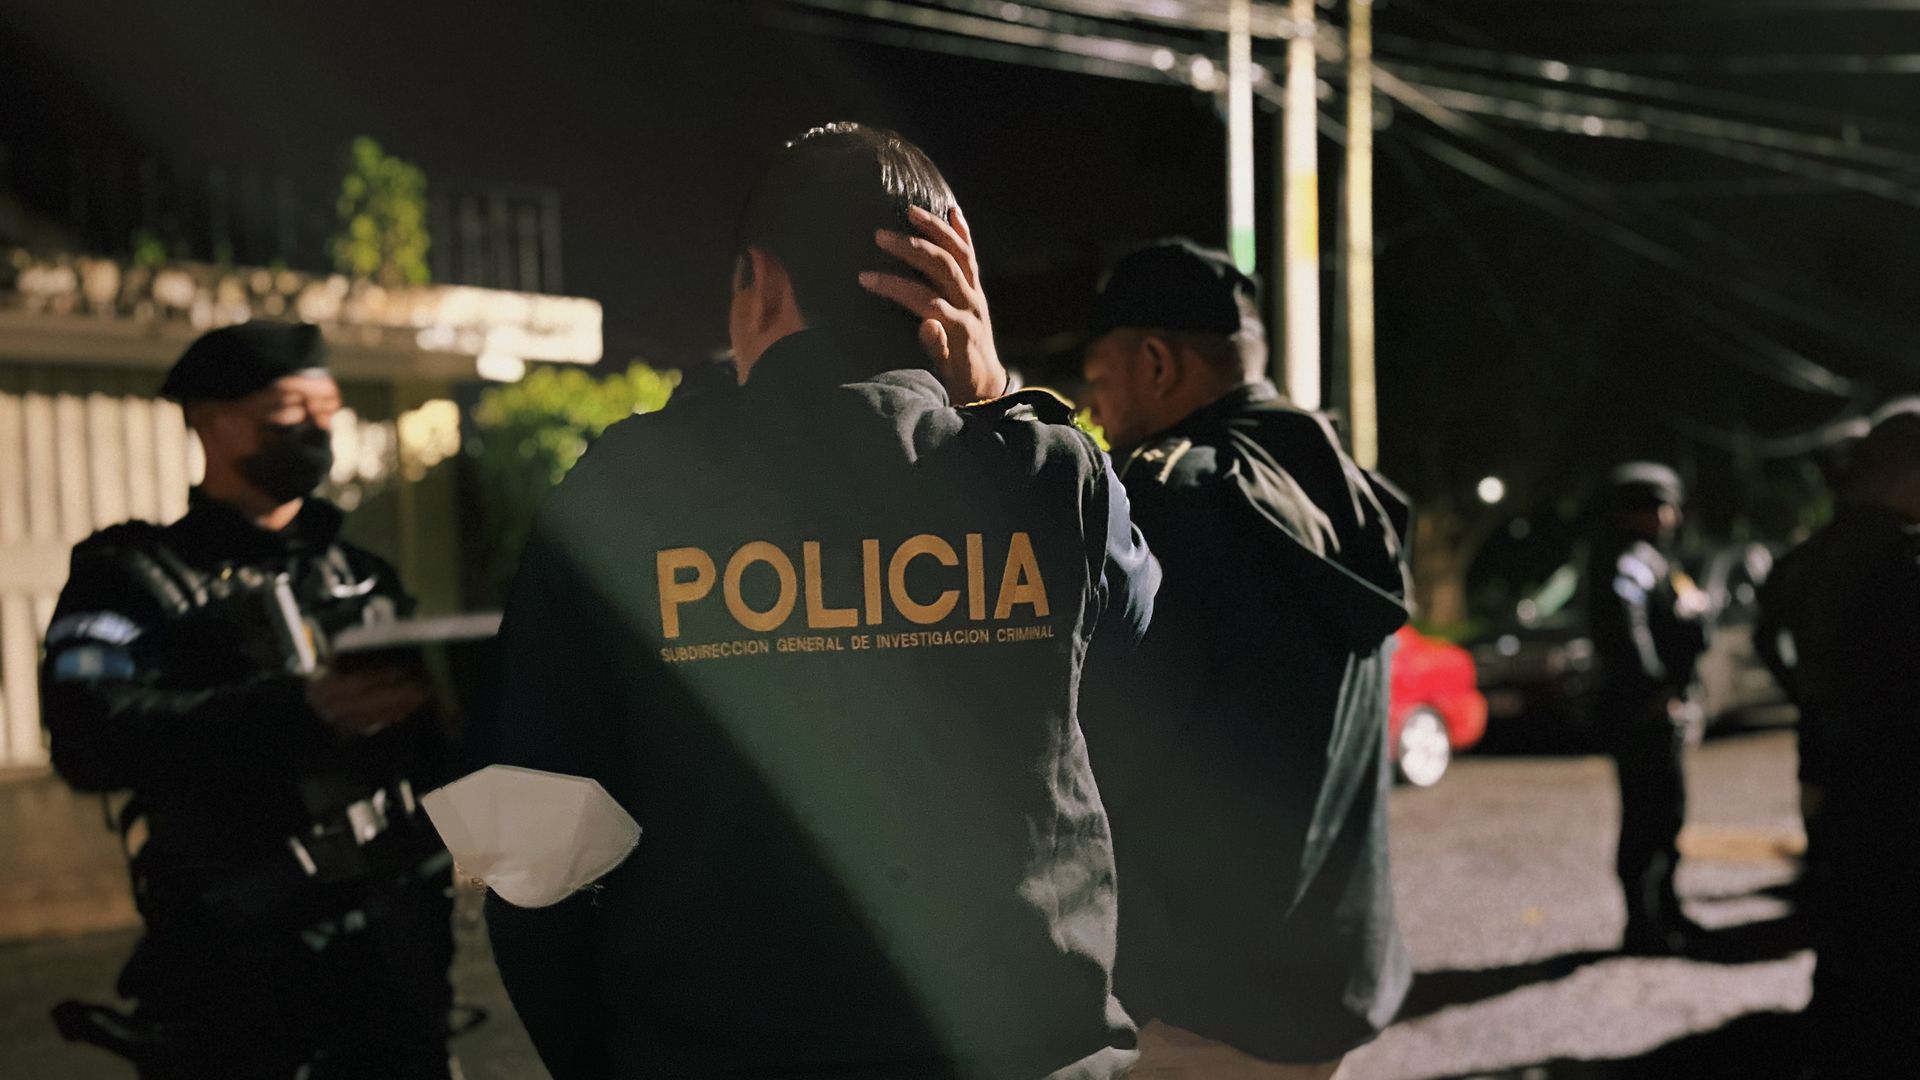 Guatemalan law enforcement prepare for an early morning search warrant execution. Photo: Stef Kight/Axios